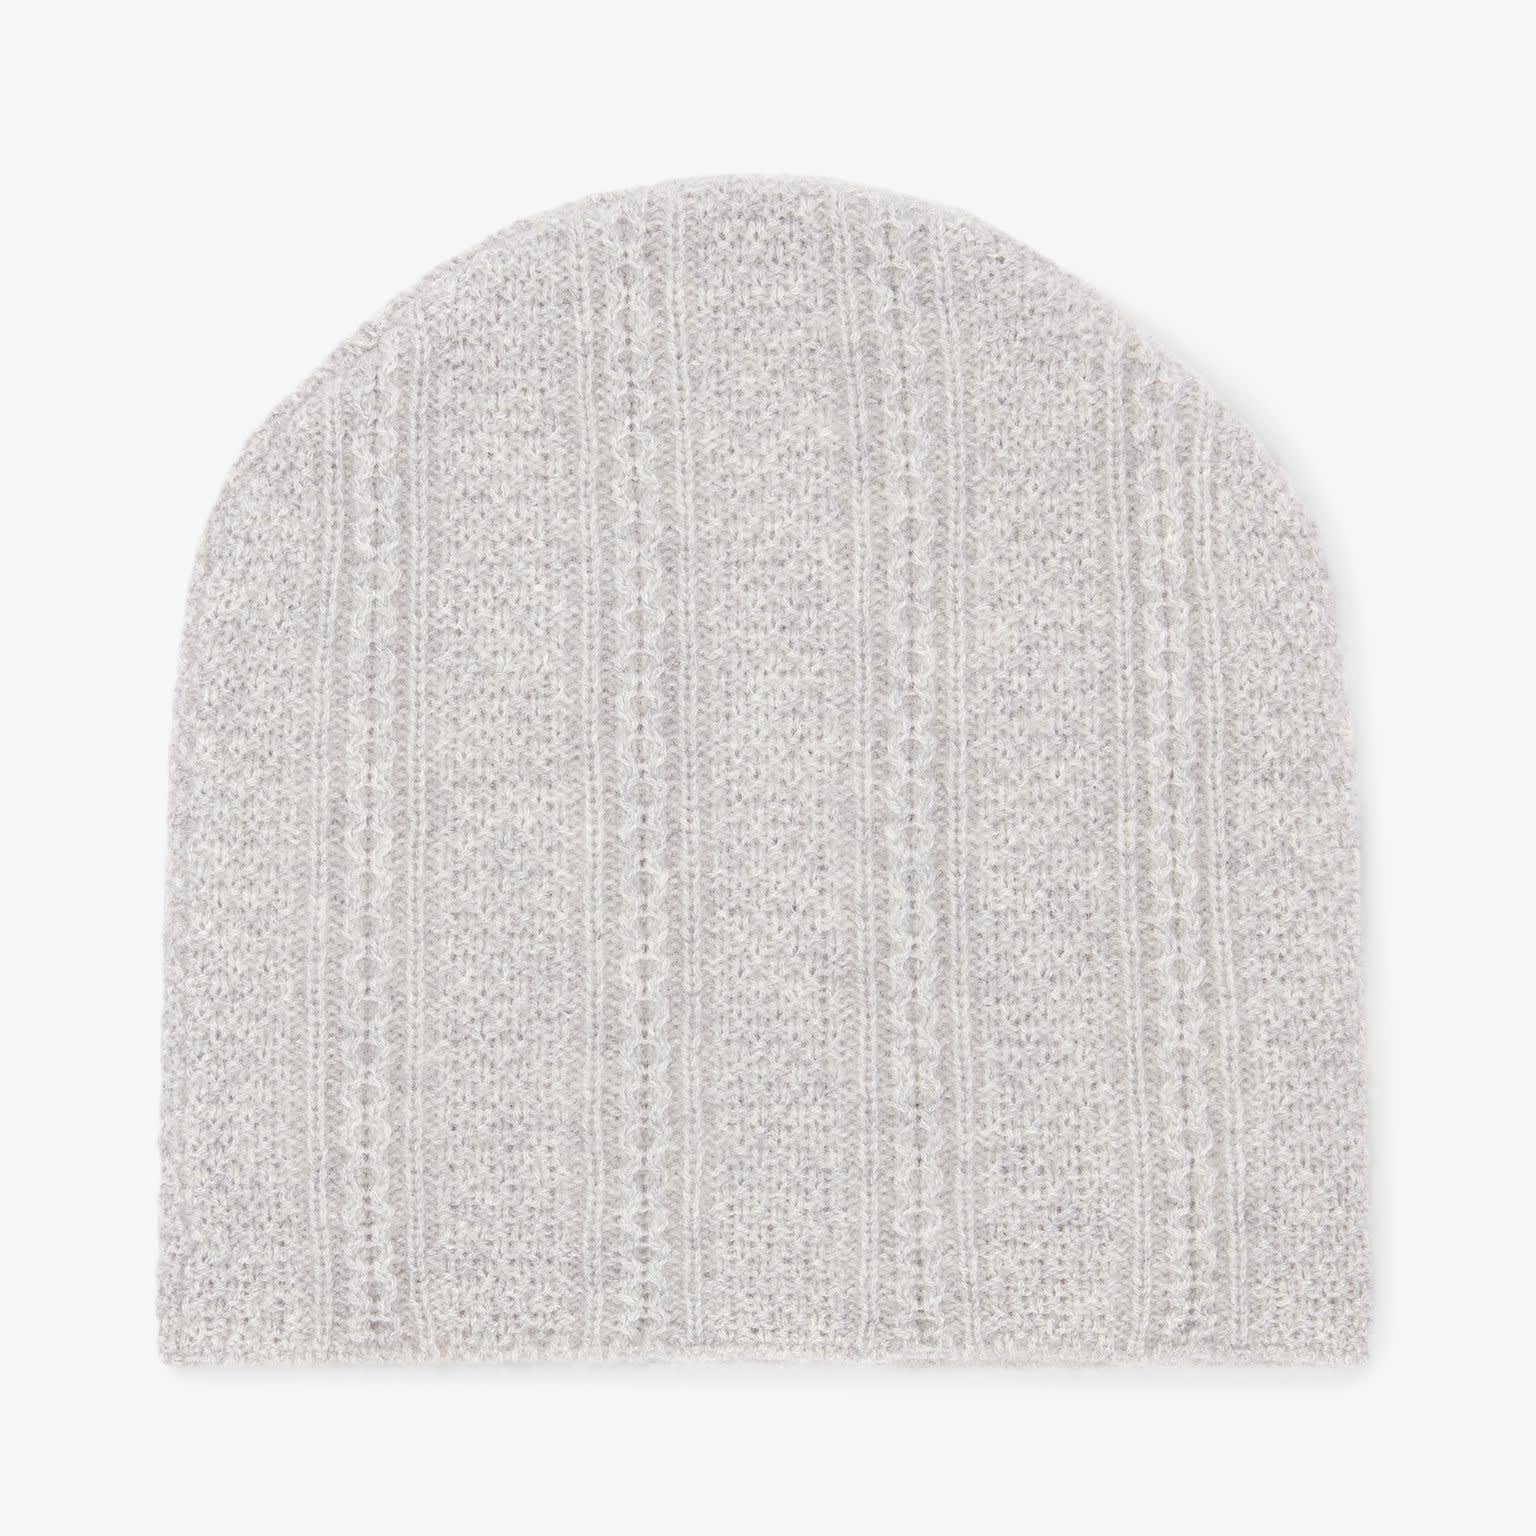 Packshot image of the Circle Cable Beanie—Cashmere in Heather Gray 